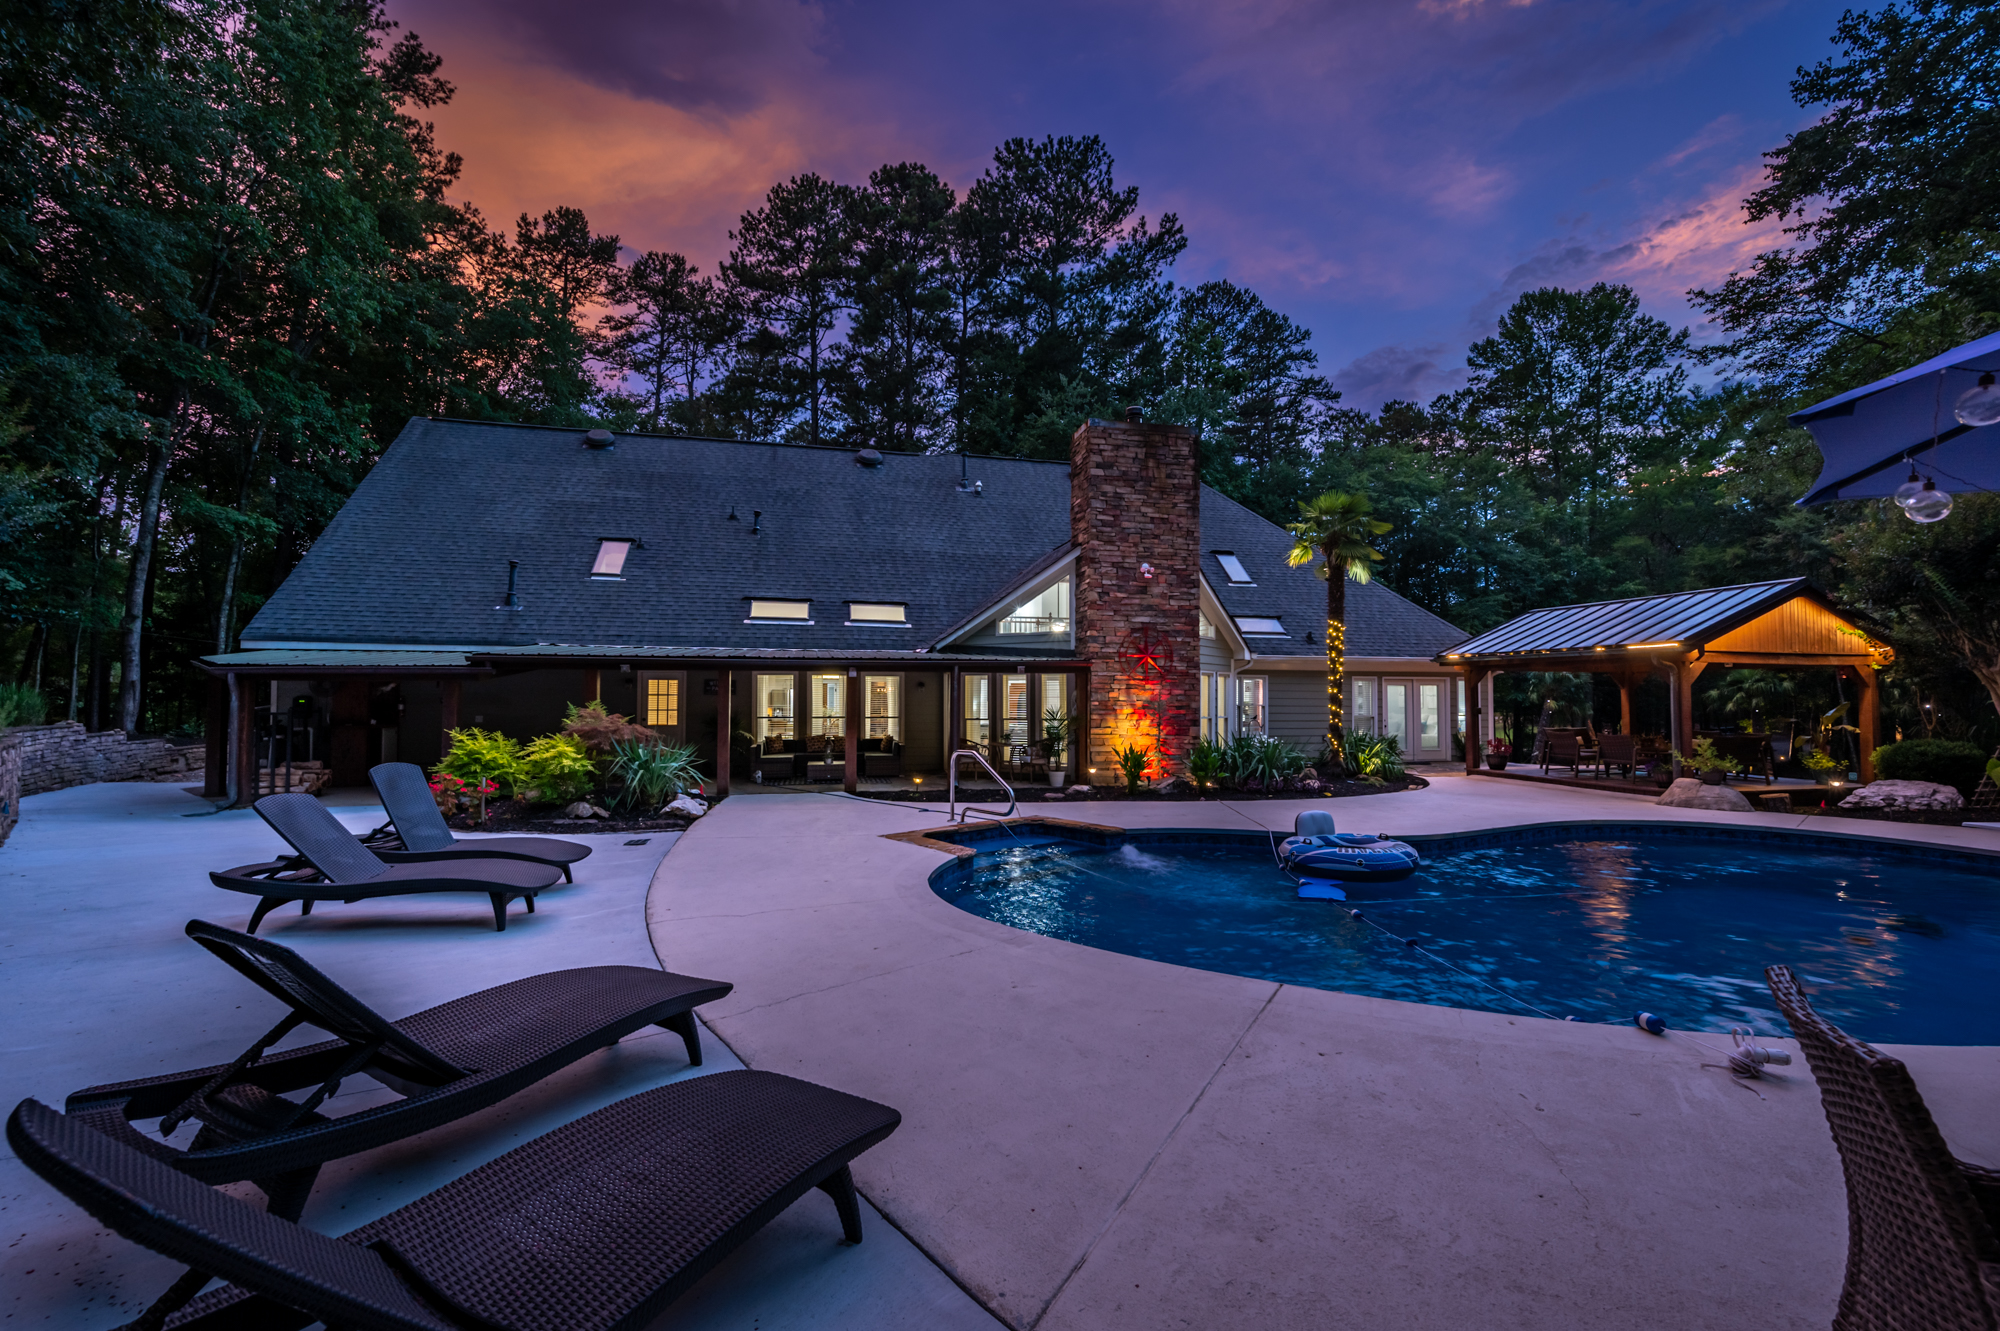 Relax In Private Pool & Cozy Gazebo At Param Farms